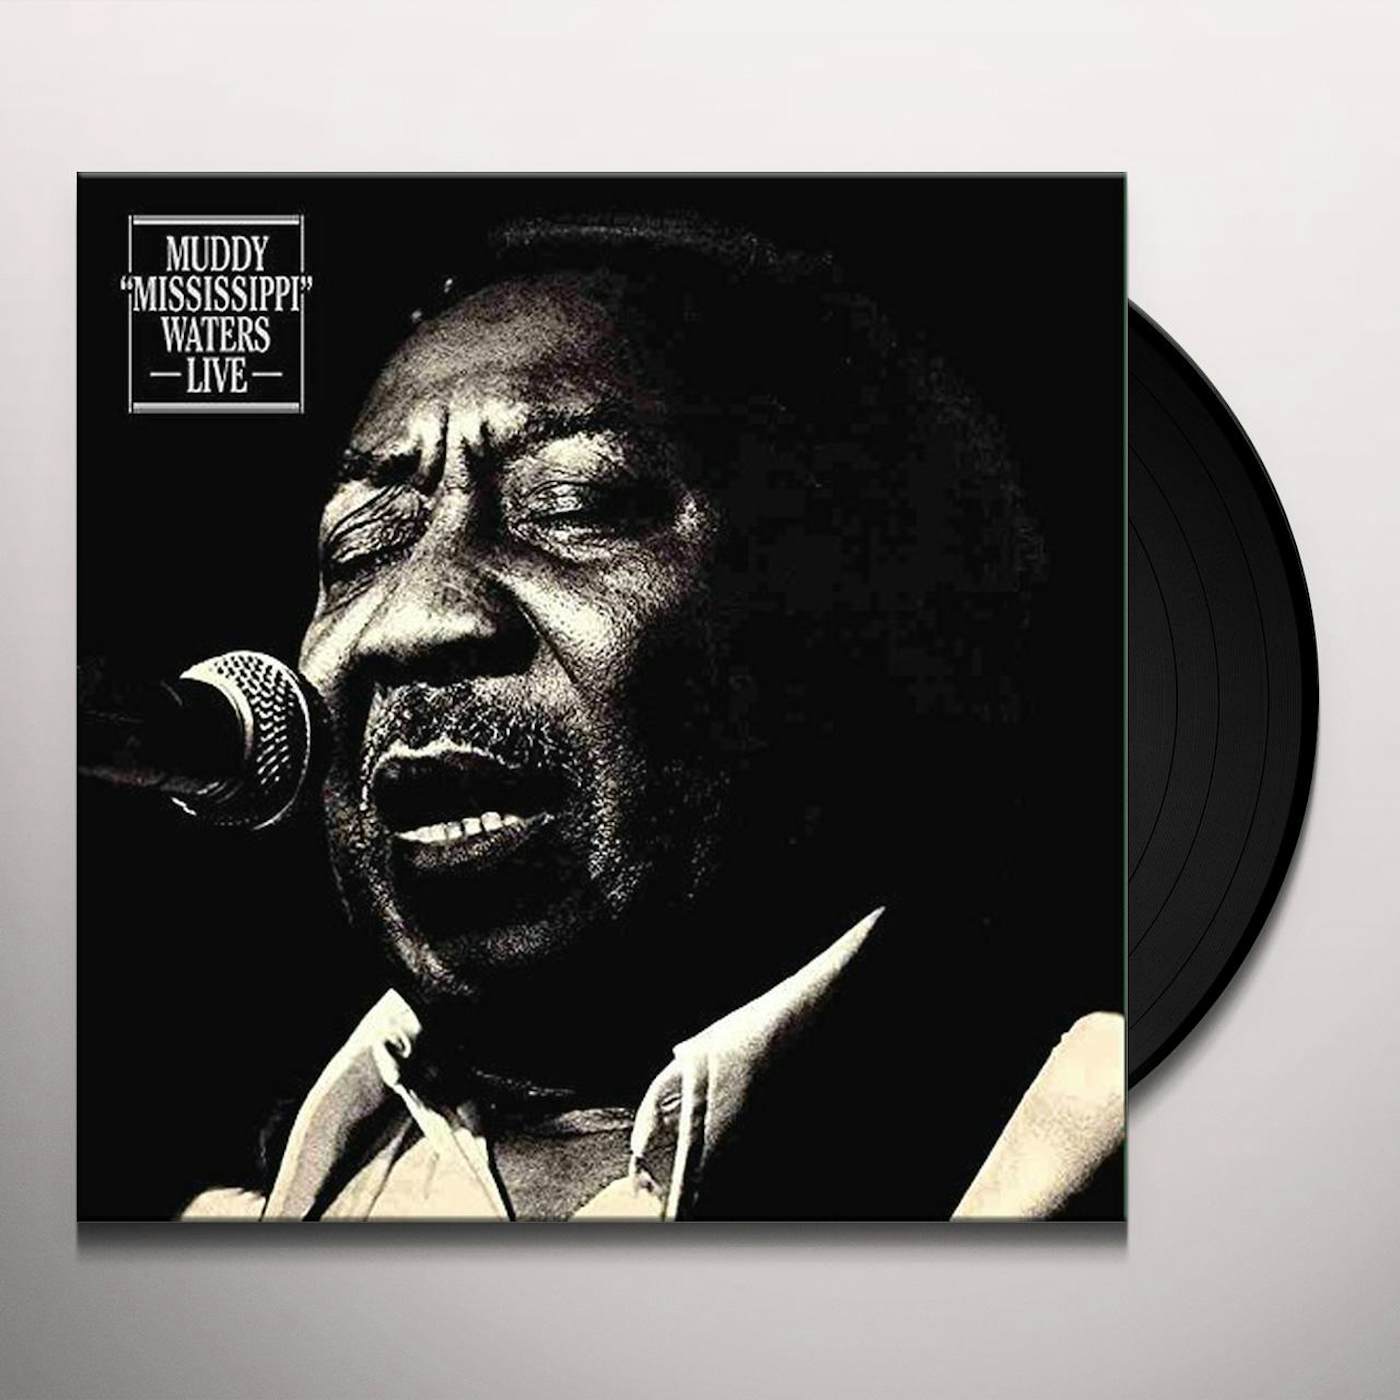 Muddy Waters Blues Band Muddy "Mississippi" Waters Live Vinyl Record